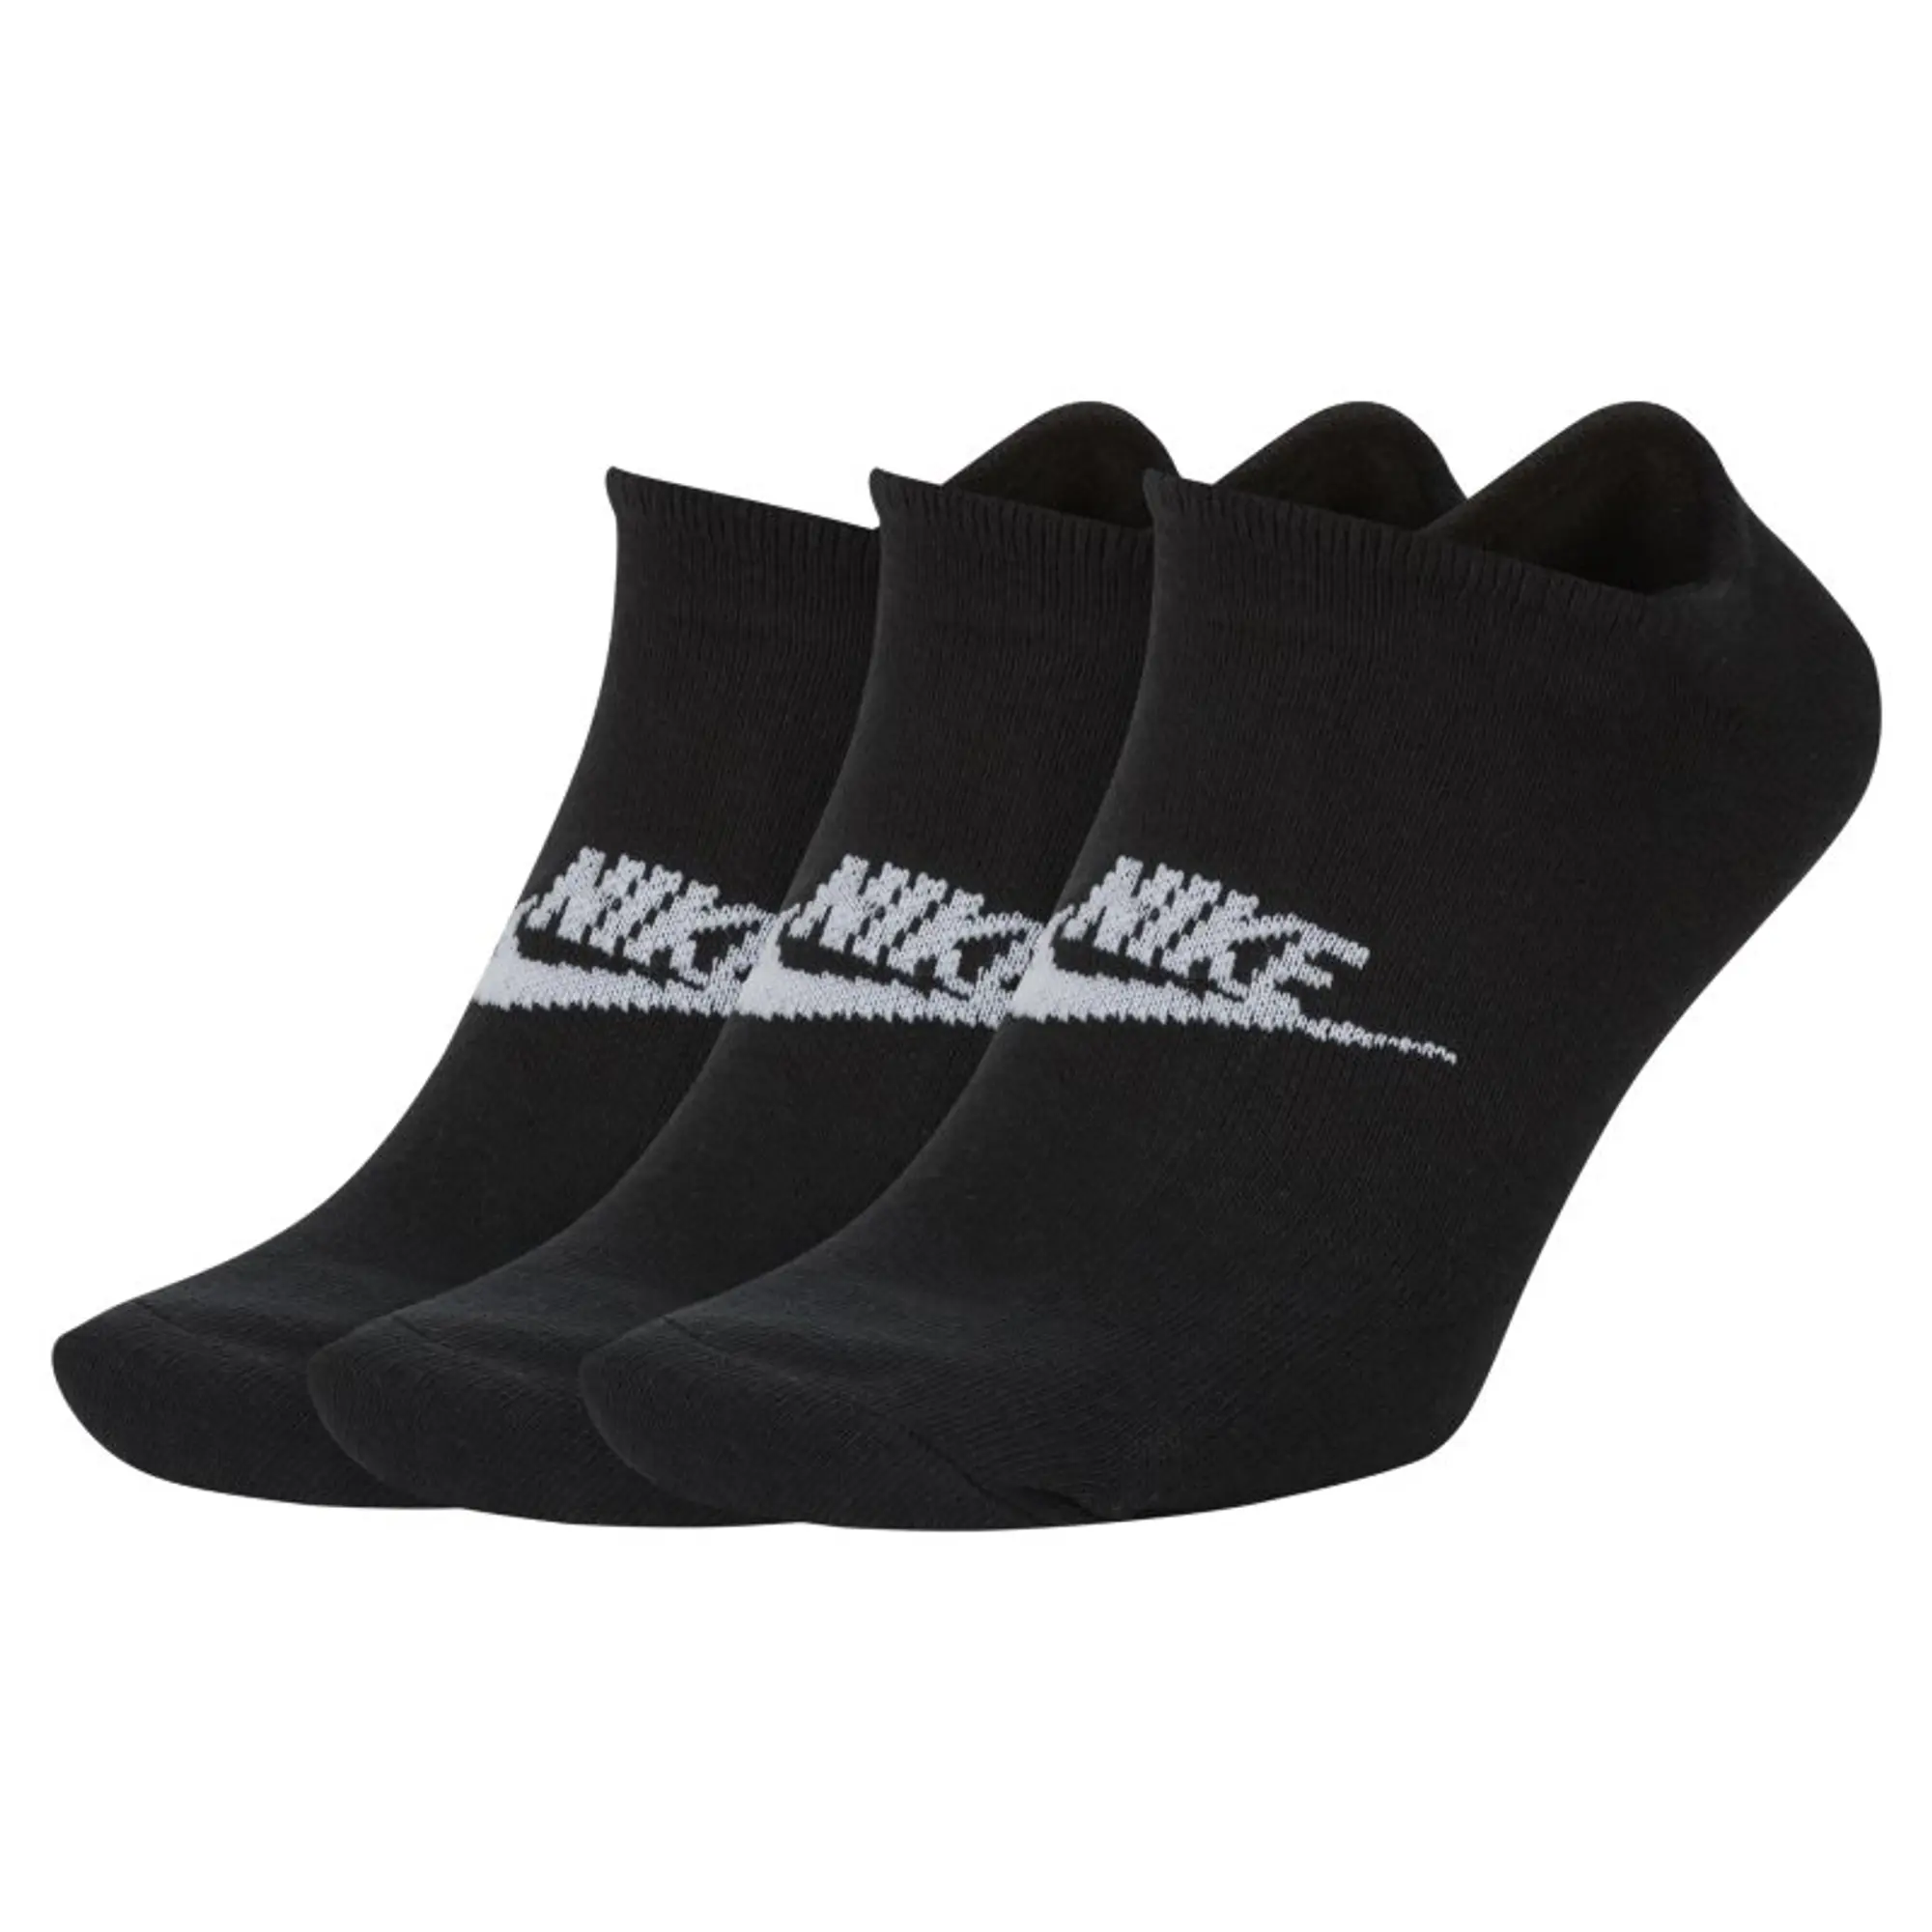 Nike Cotton Cushion Low Cut Ankle Sock - 3 Pack Black/White